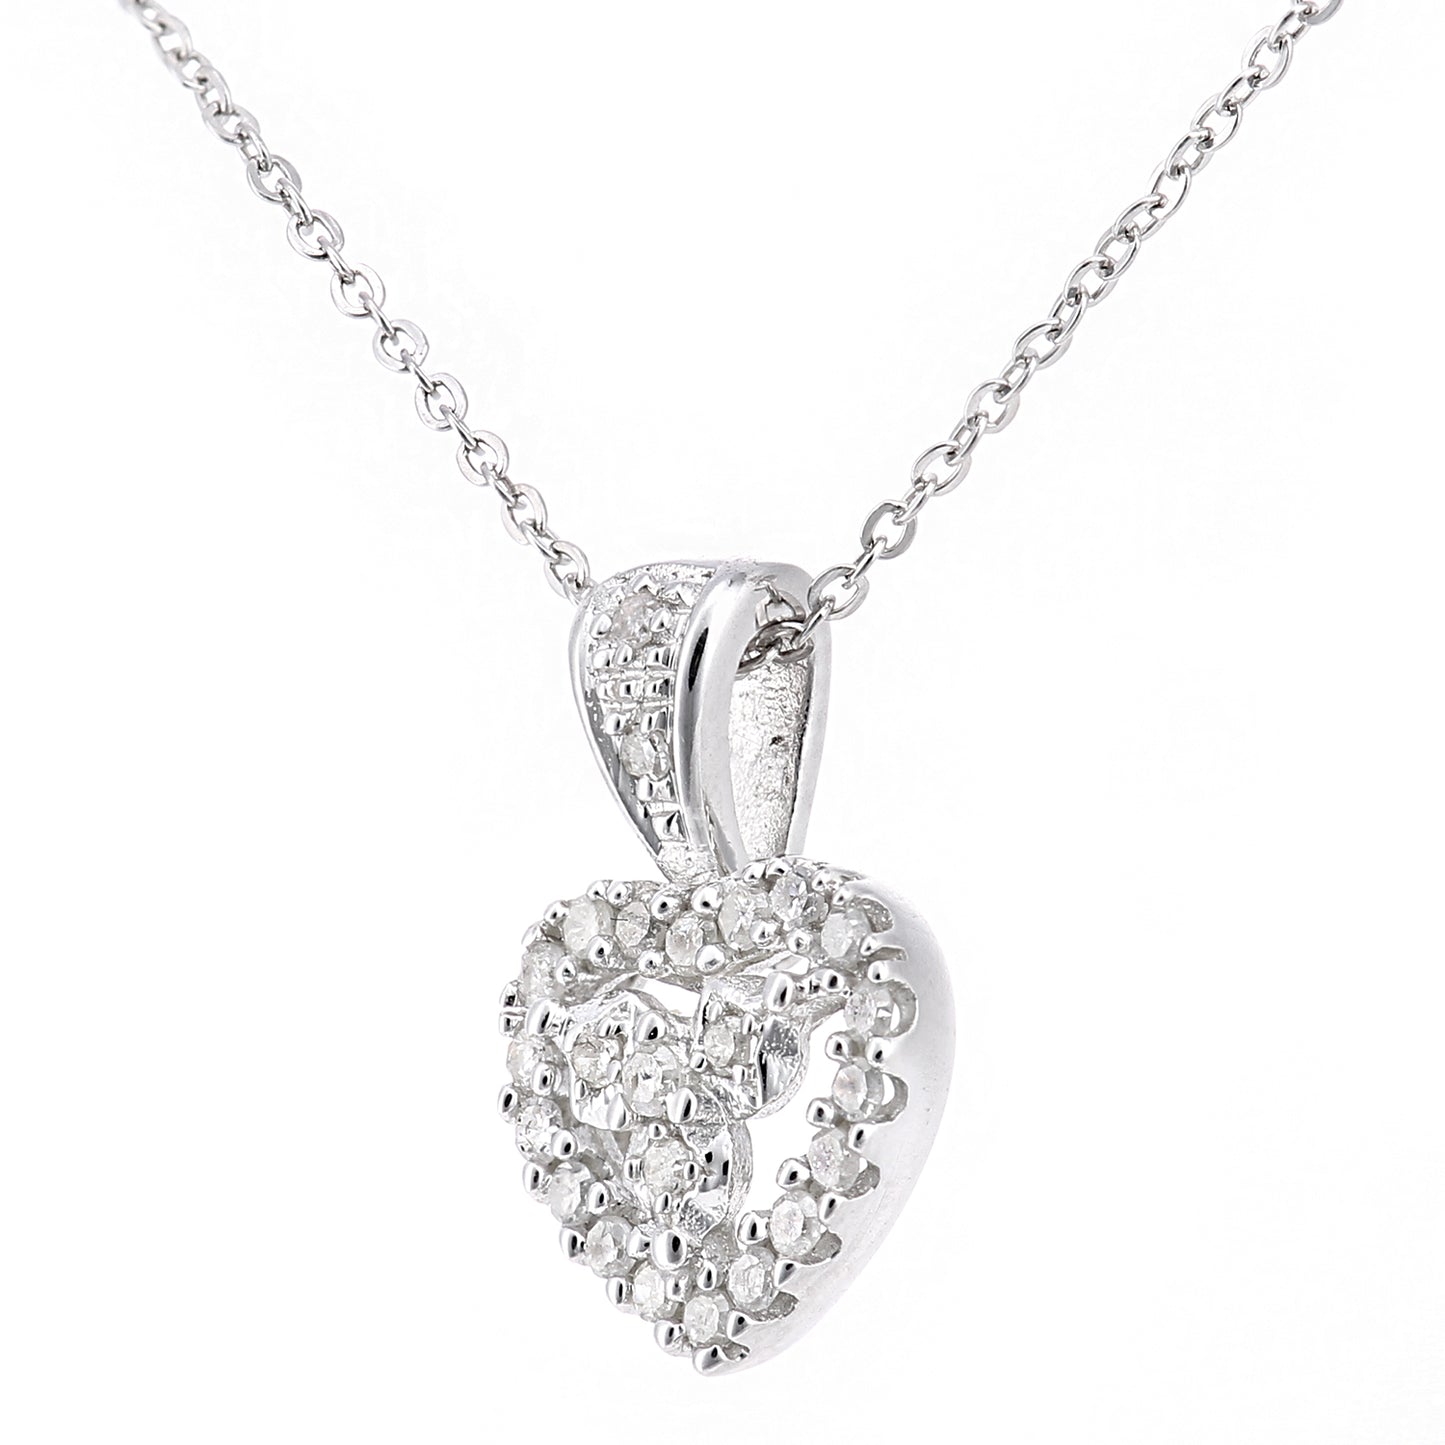 9ct White Gold  Round 12pts Diamond Heart Pendant Necklace 18 inch - PP0AXL5928W